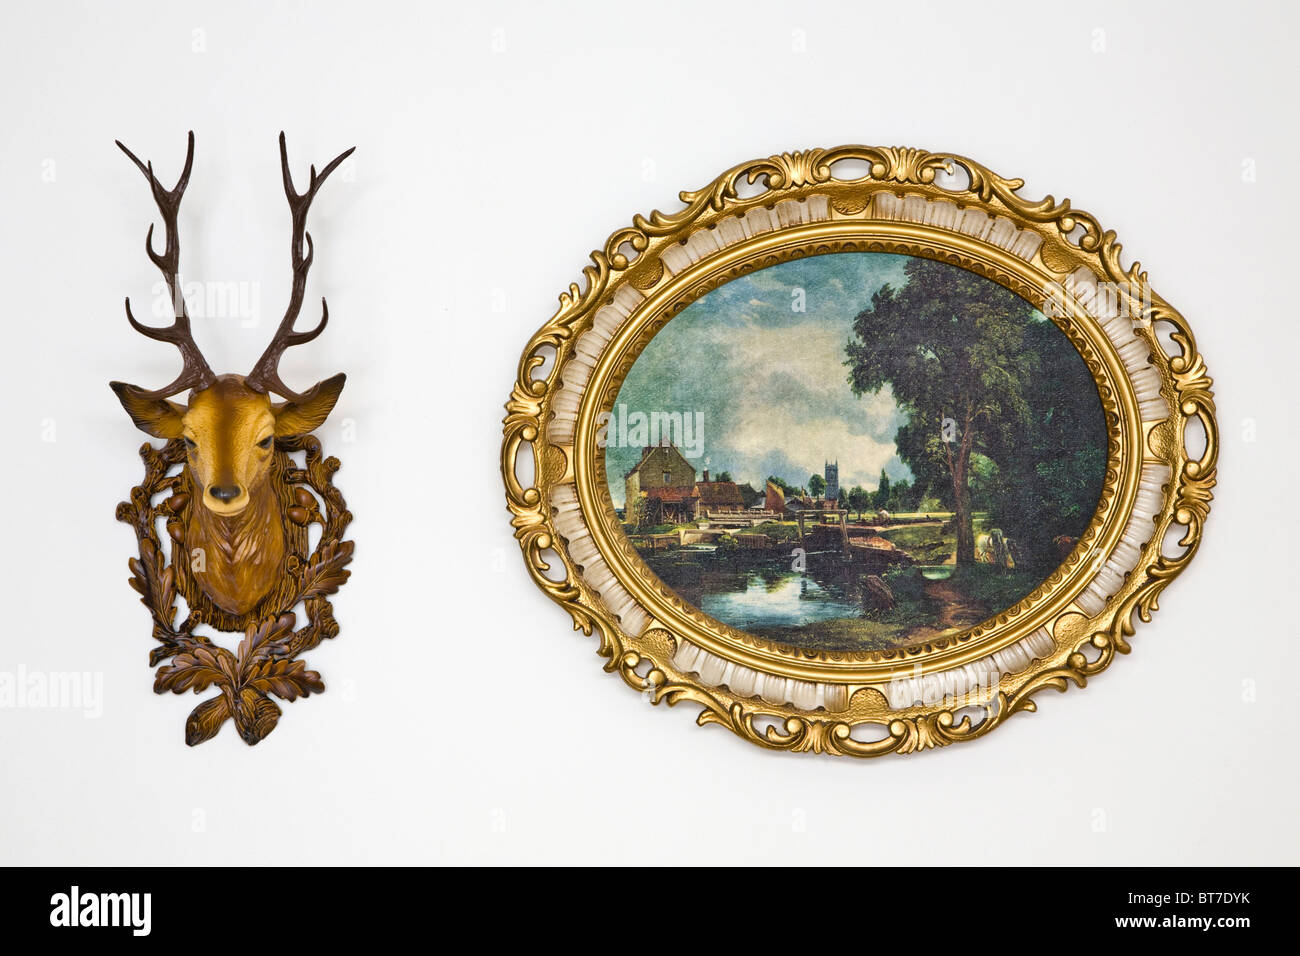 Plastic deer head and a kitschy oval, picture frame with a landscape motive Stock Photo